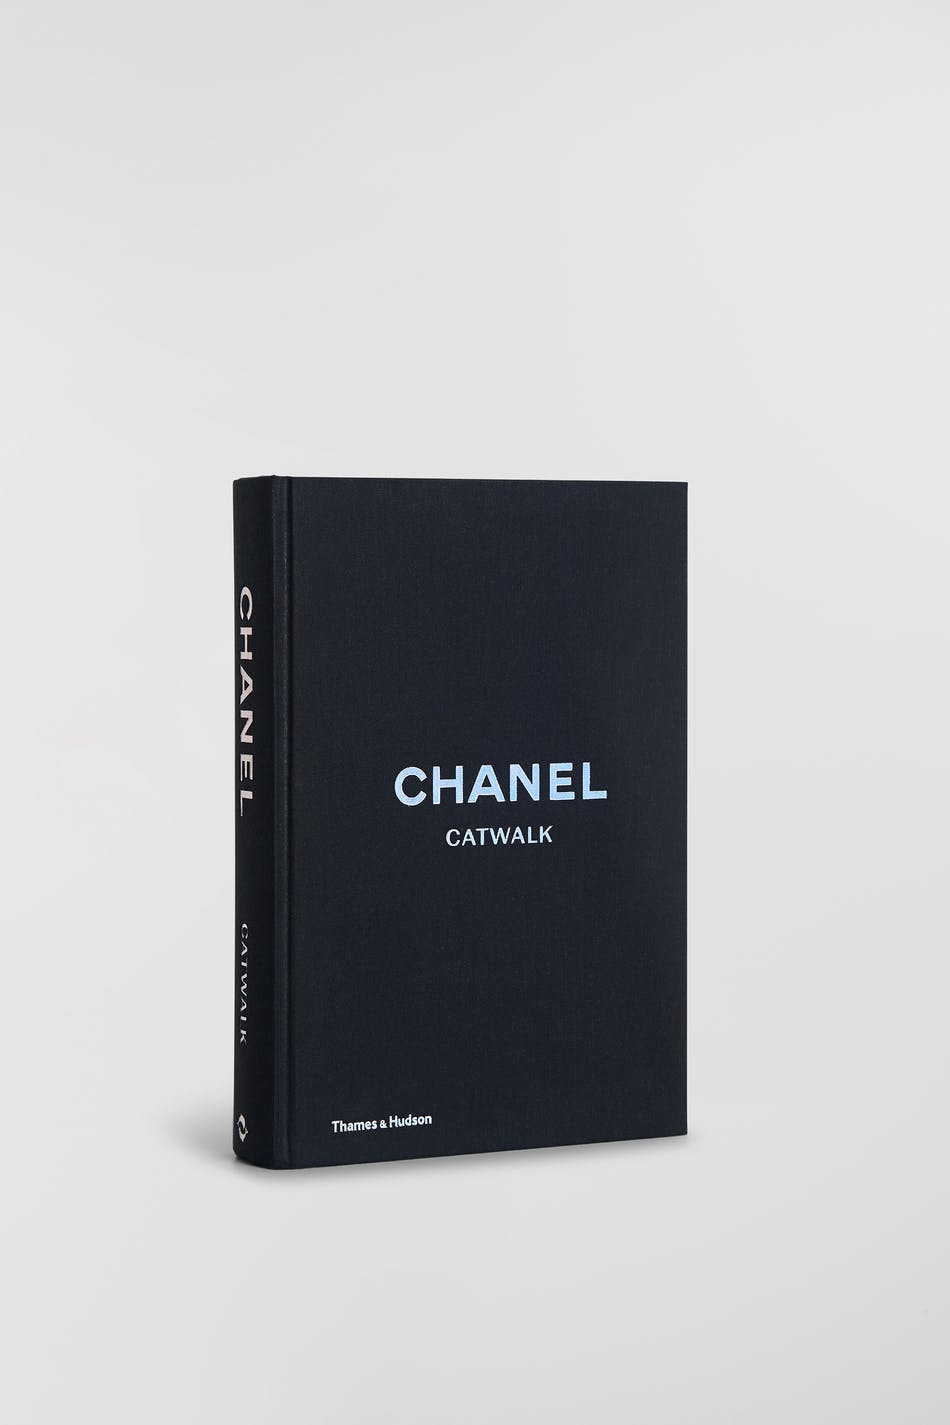 New mags Chanel book